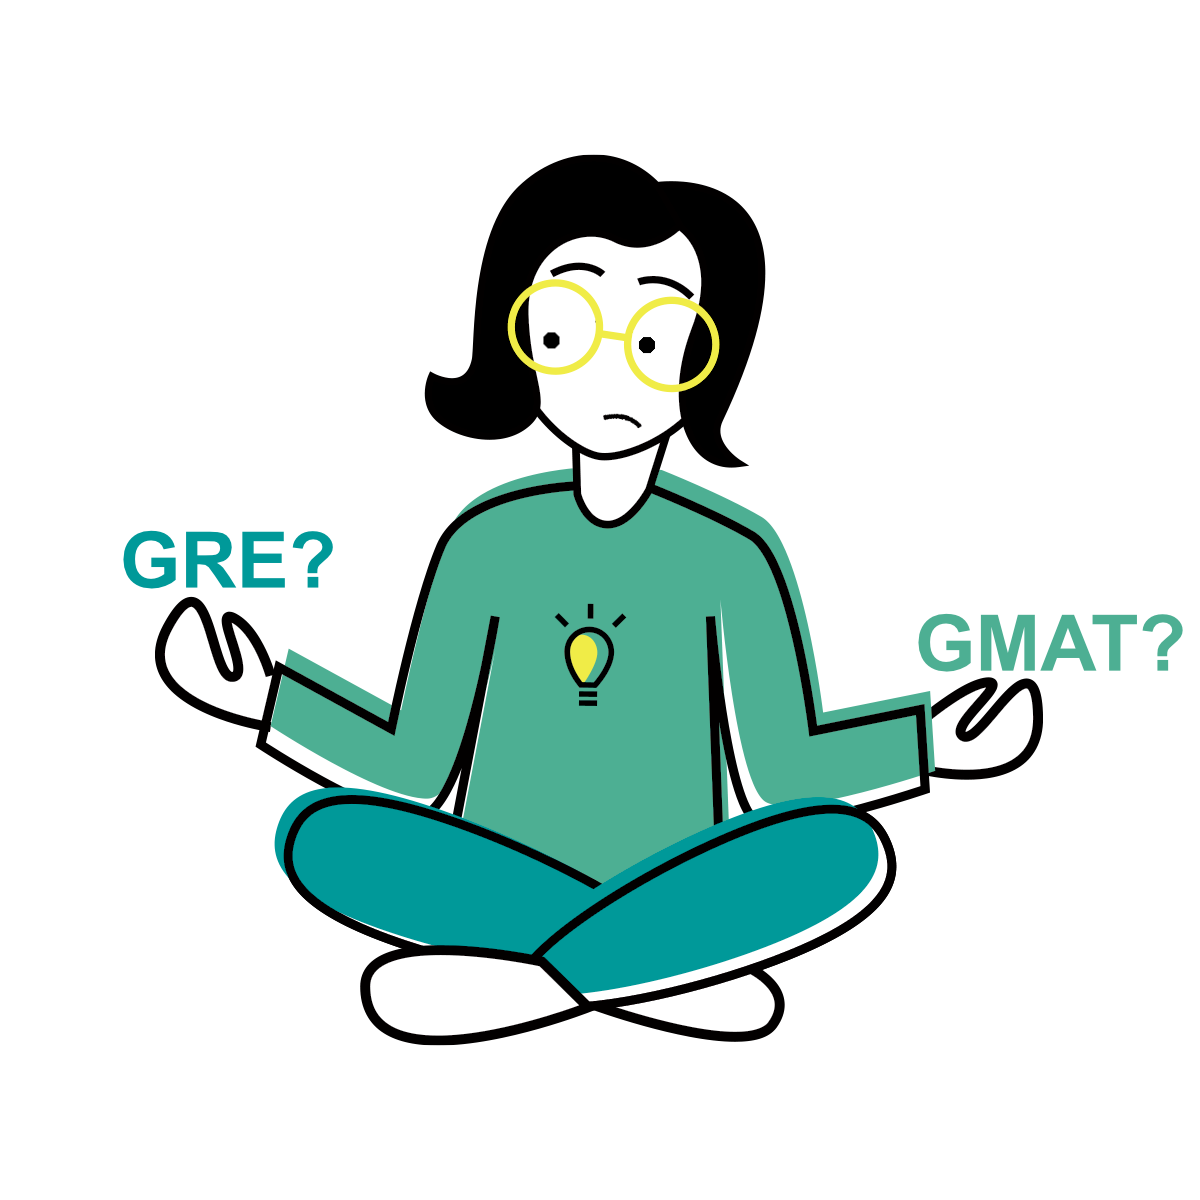 GMAT vs. GRE: Which is Better for Business School Admissions?